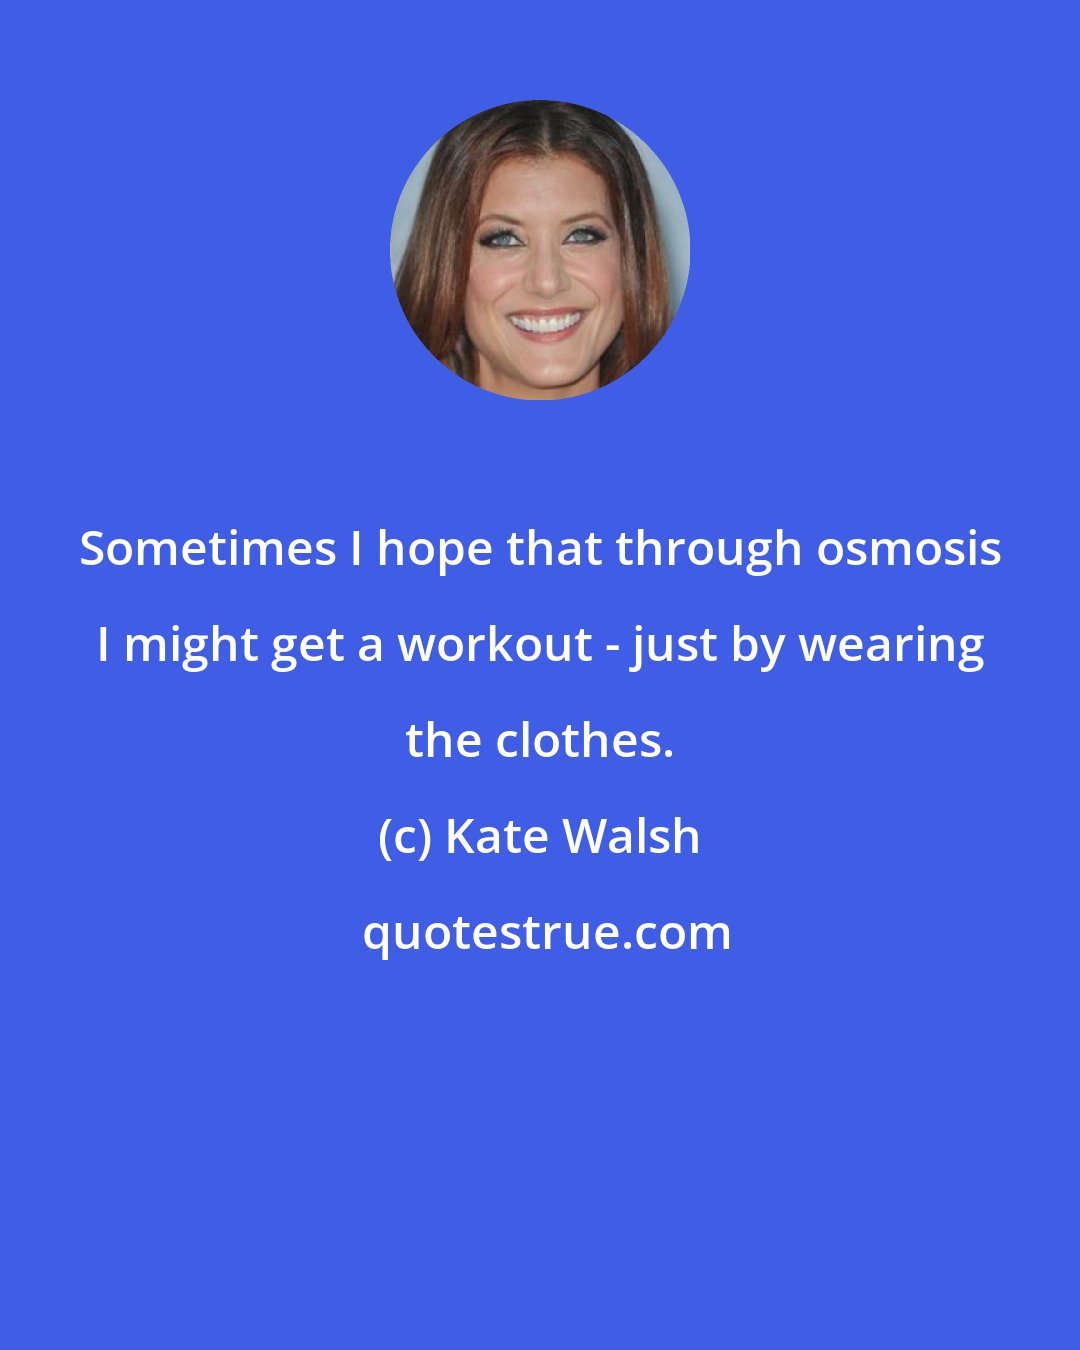 Kate Walsh: Sometimes I hope that through osmosis I might get a workout - just by wearing the clothes.